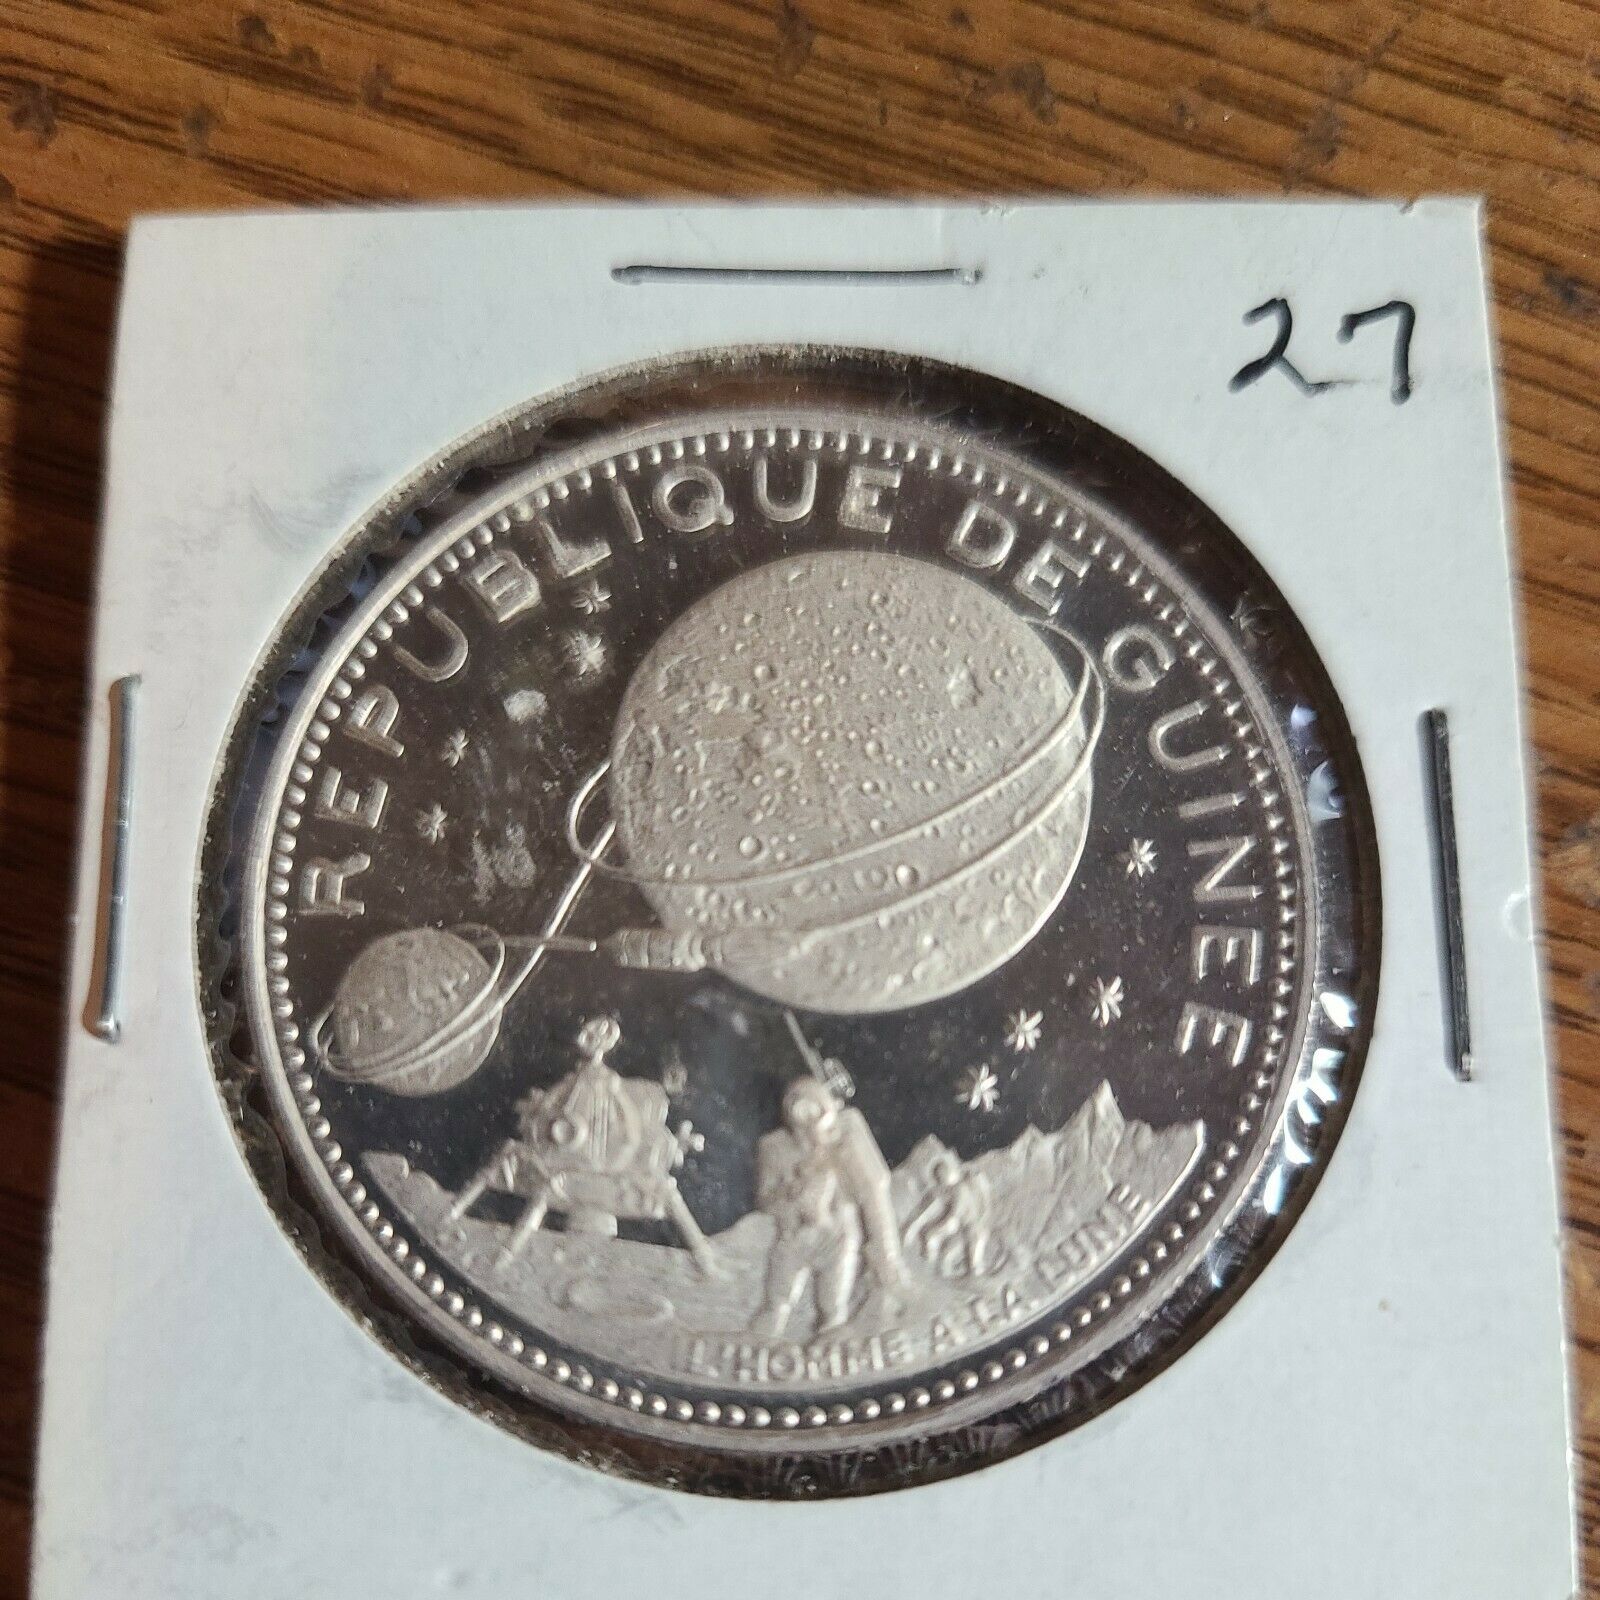 1969 Republic Of Guinea Silver Proof 250 Guinee Francs Walk On The Moon